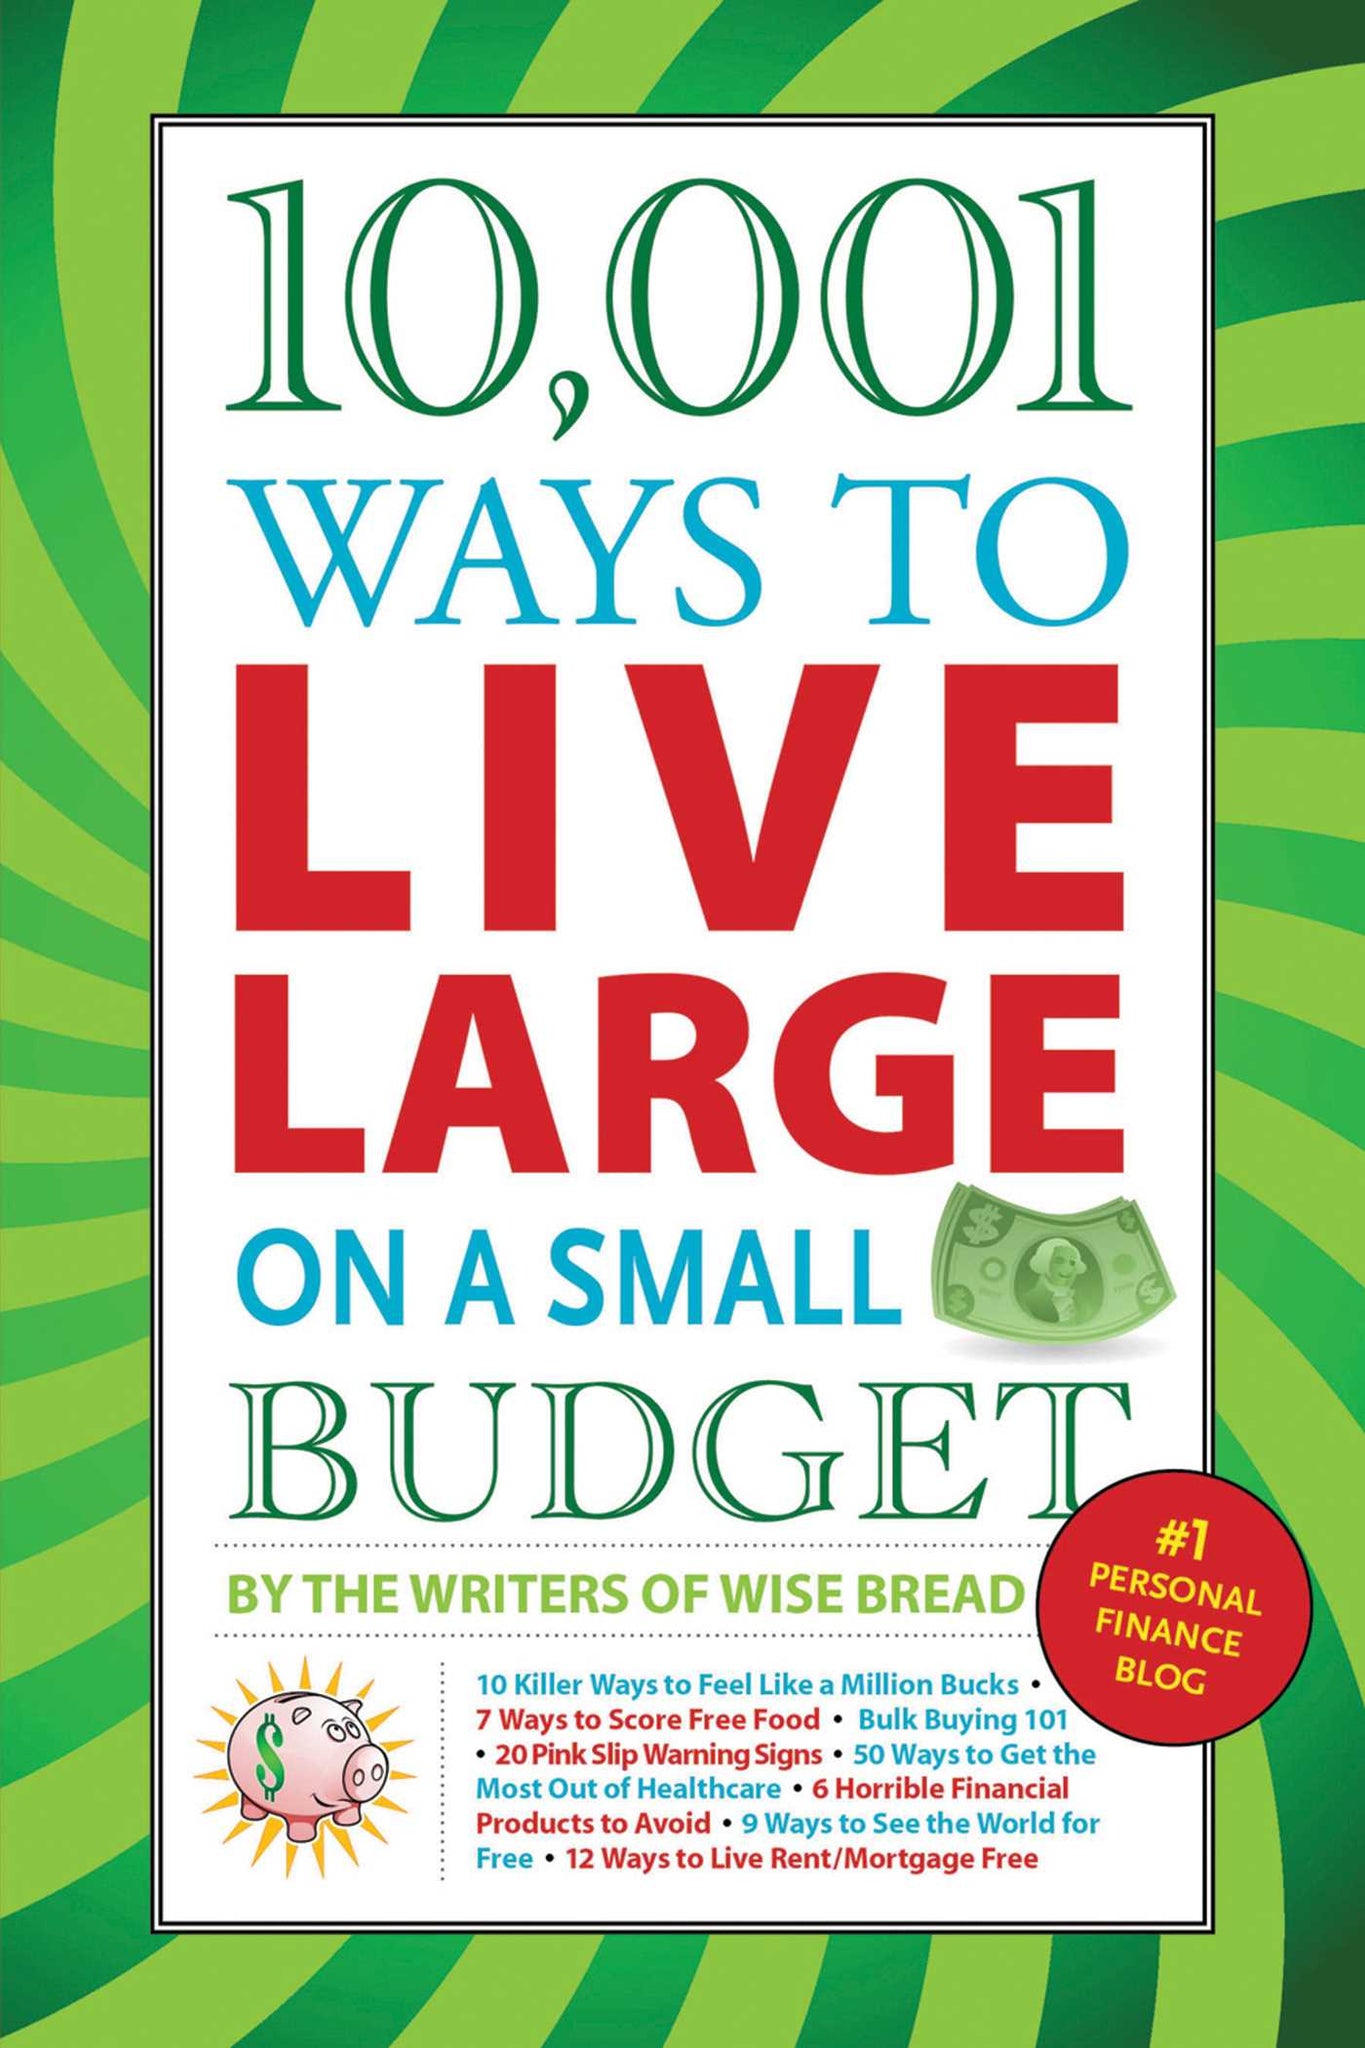 10,001 Ways to Live Large on a Small Budget